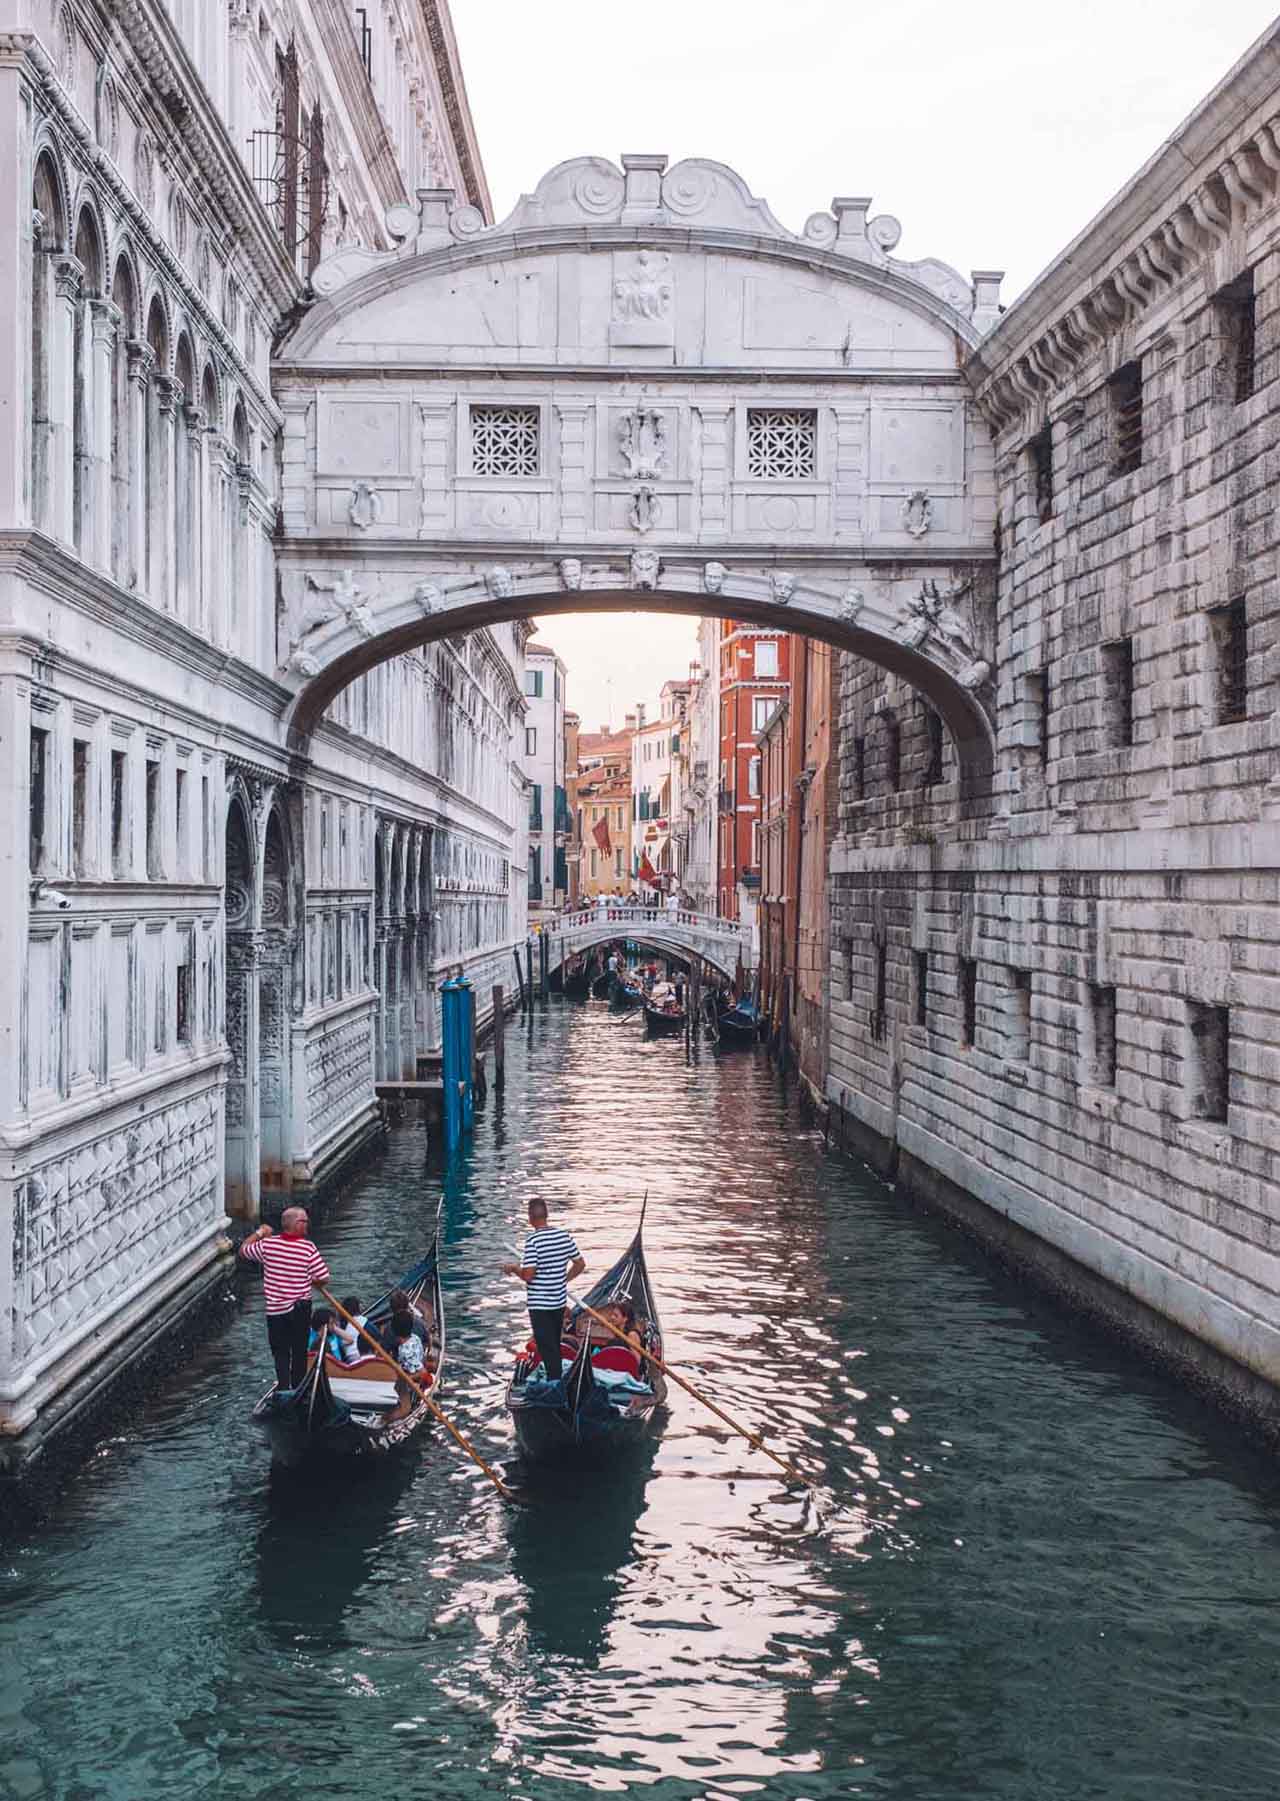 10 Things to Do in Venice (That Aren’t Gondolas) • The Blonde Abroad